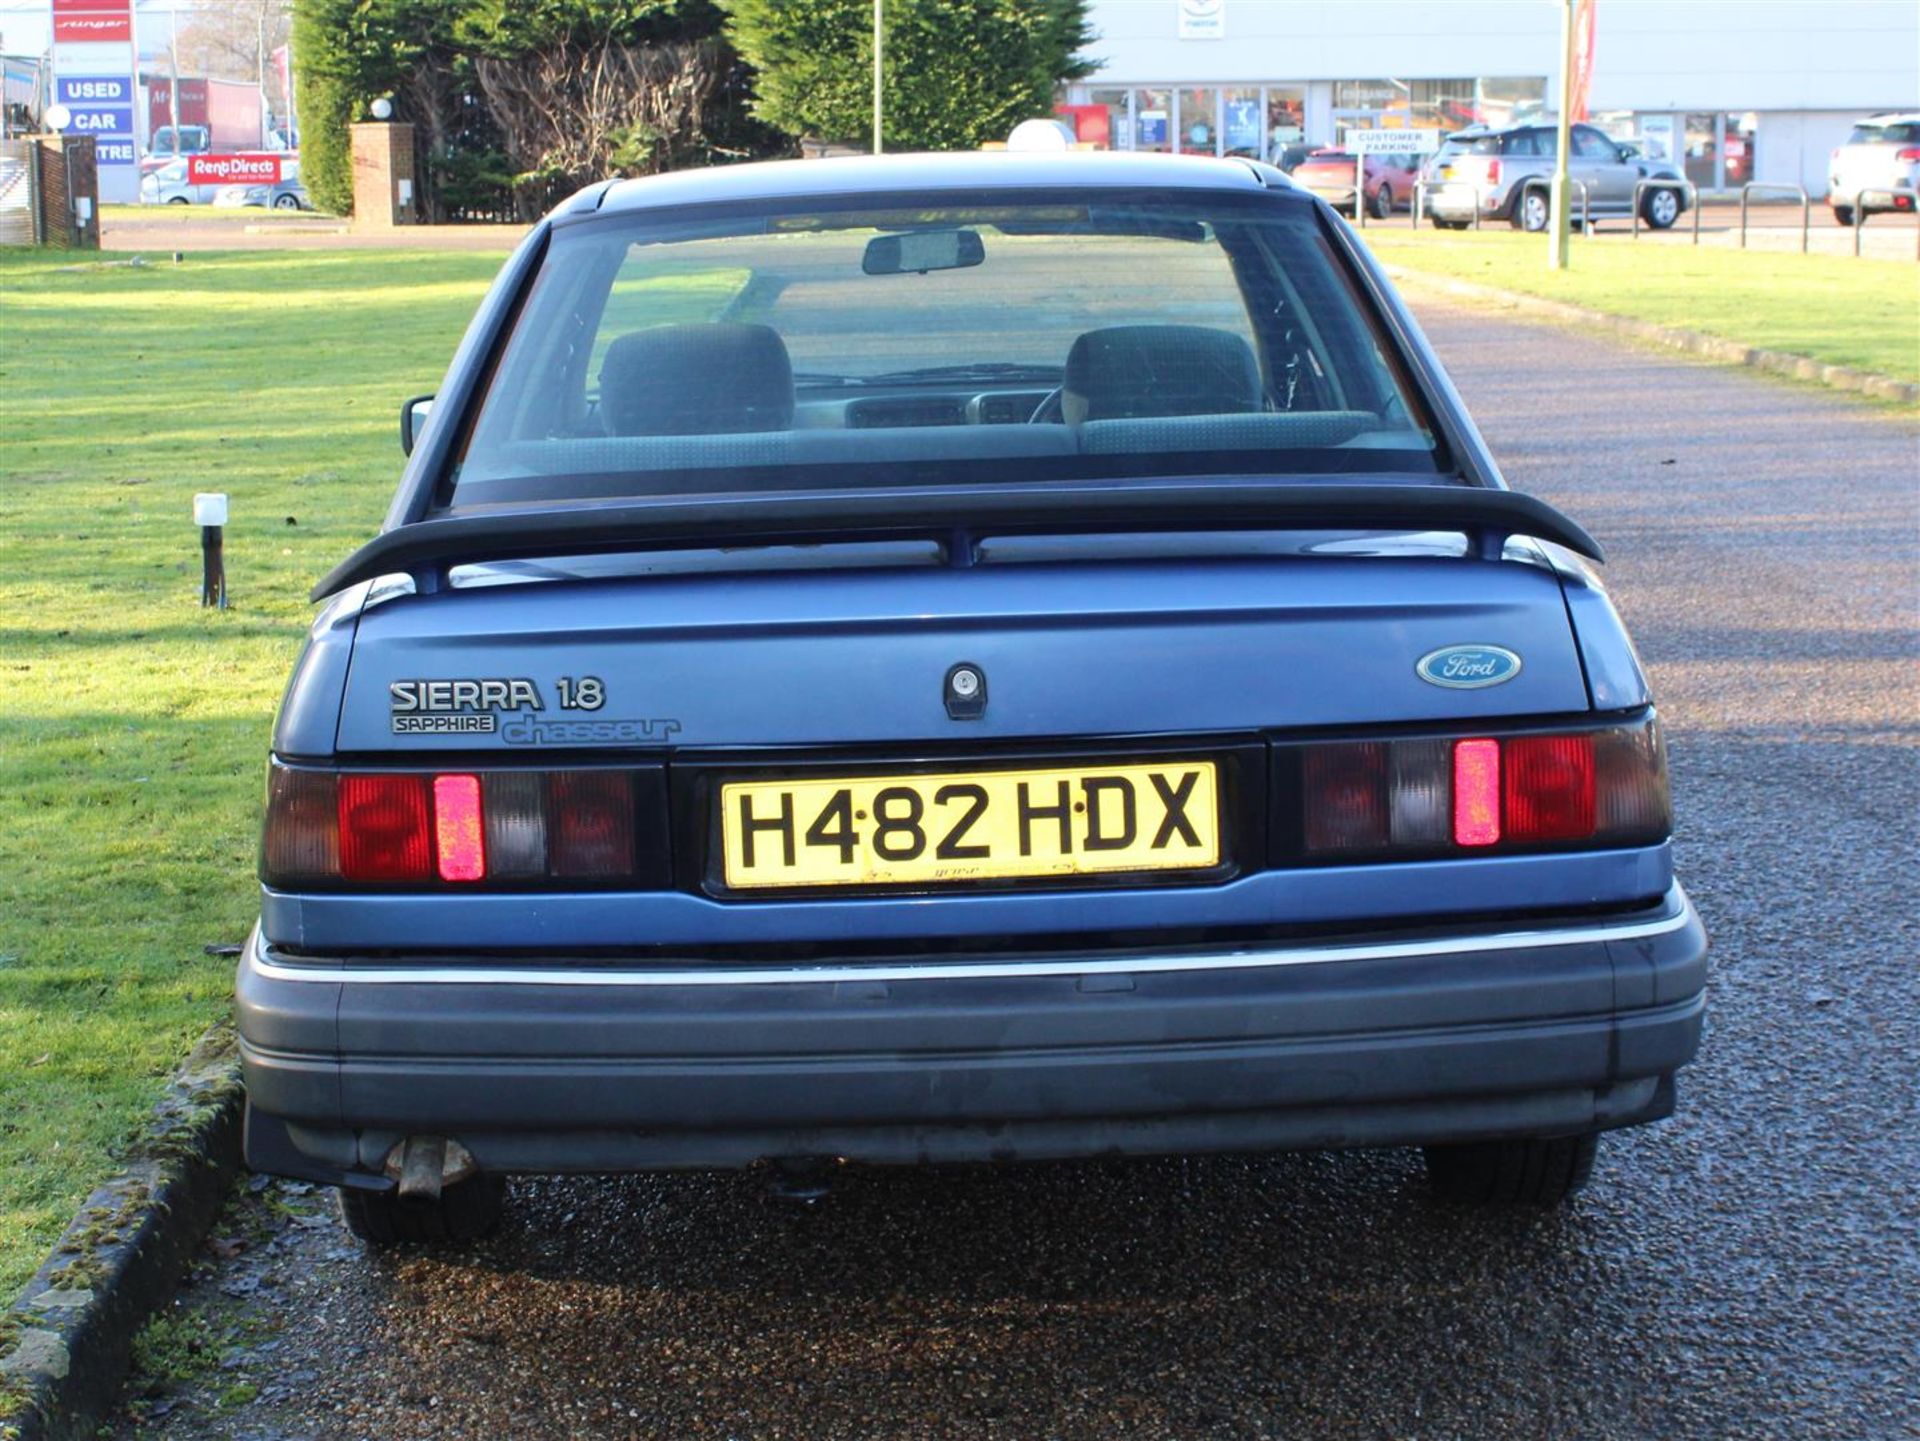 1991 Ford Sierra 1.8 Sapphire Chasseur - Image 5 of 28